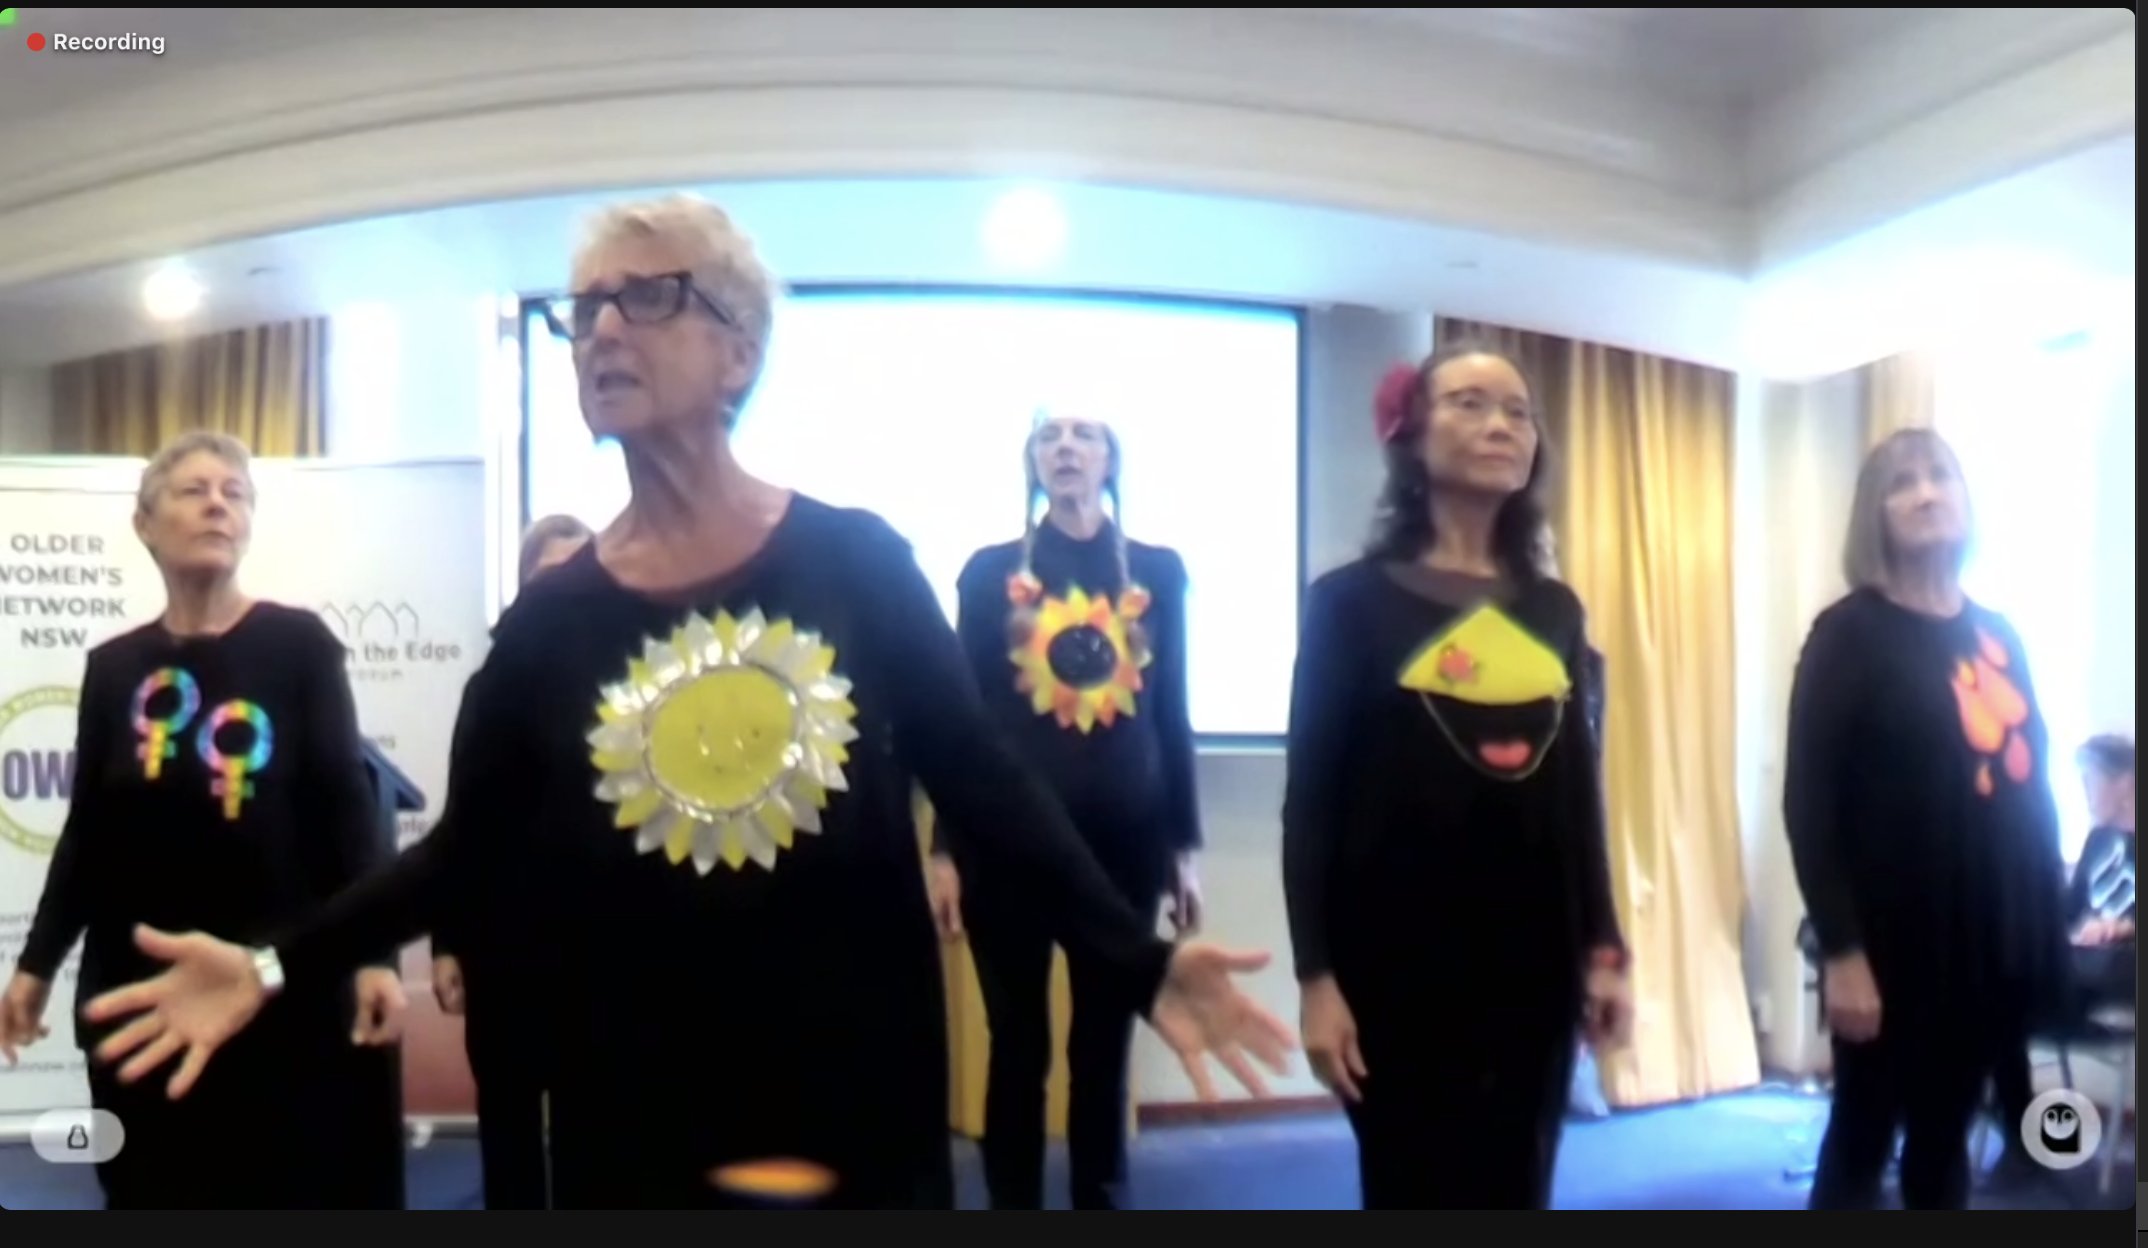 A group of five older women singing as a group